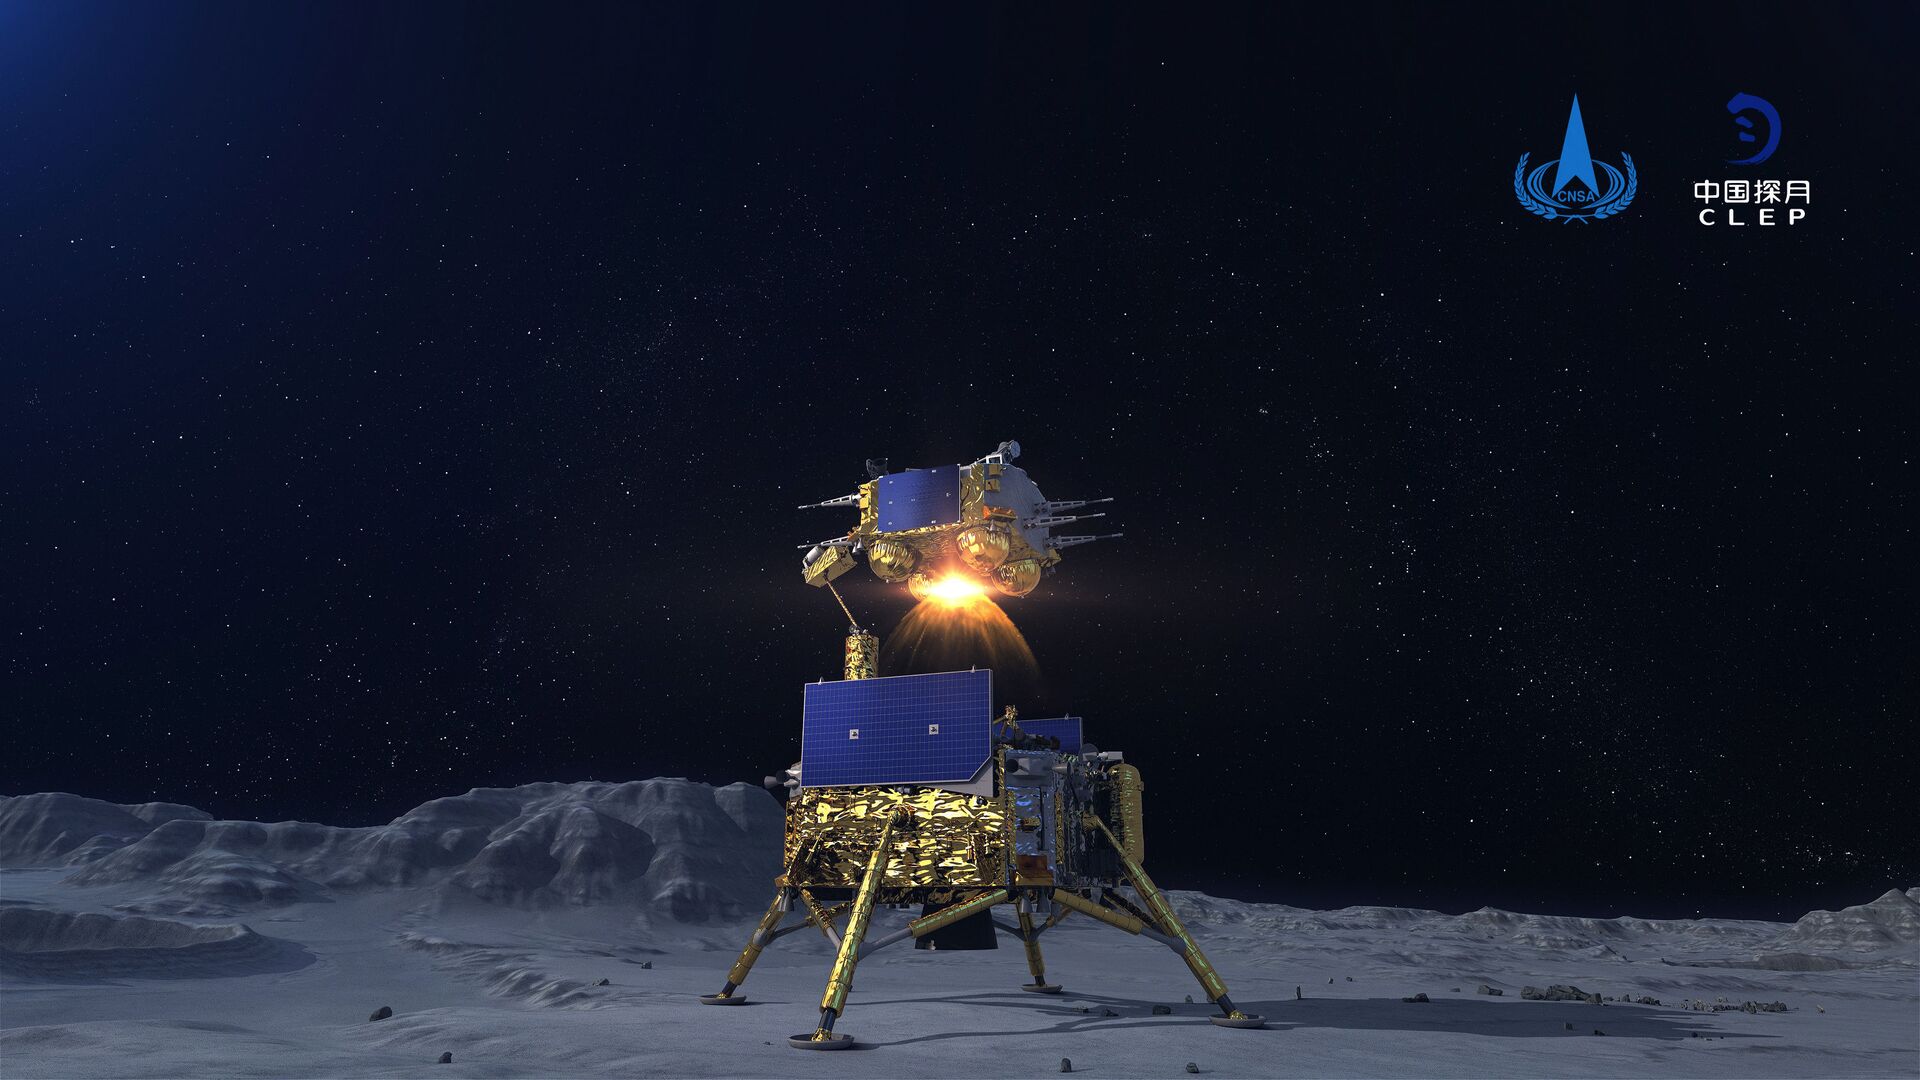 In this China National Space Administration (CNSA) photo released by Xinhua News Agency, a simulated image of the ascender of Chang'e-5 spacecraft blasting off from the lunar surface at the Beijing Aerospace Control Center (BACC) in Beijing on Dec. 3, 2020. The Chinese lunar probe lifted off from the moon Thursday night with a cargo of lunar samples on the first stage of its return to Earth, state media reported.  - Sputnik International, 1920, 09.09.2022